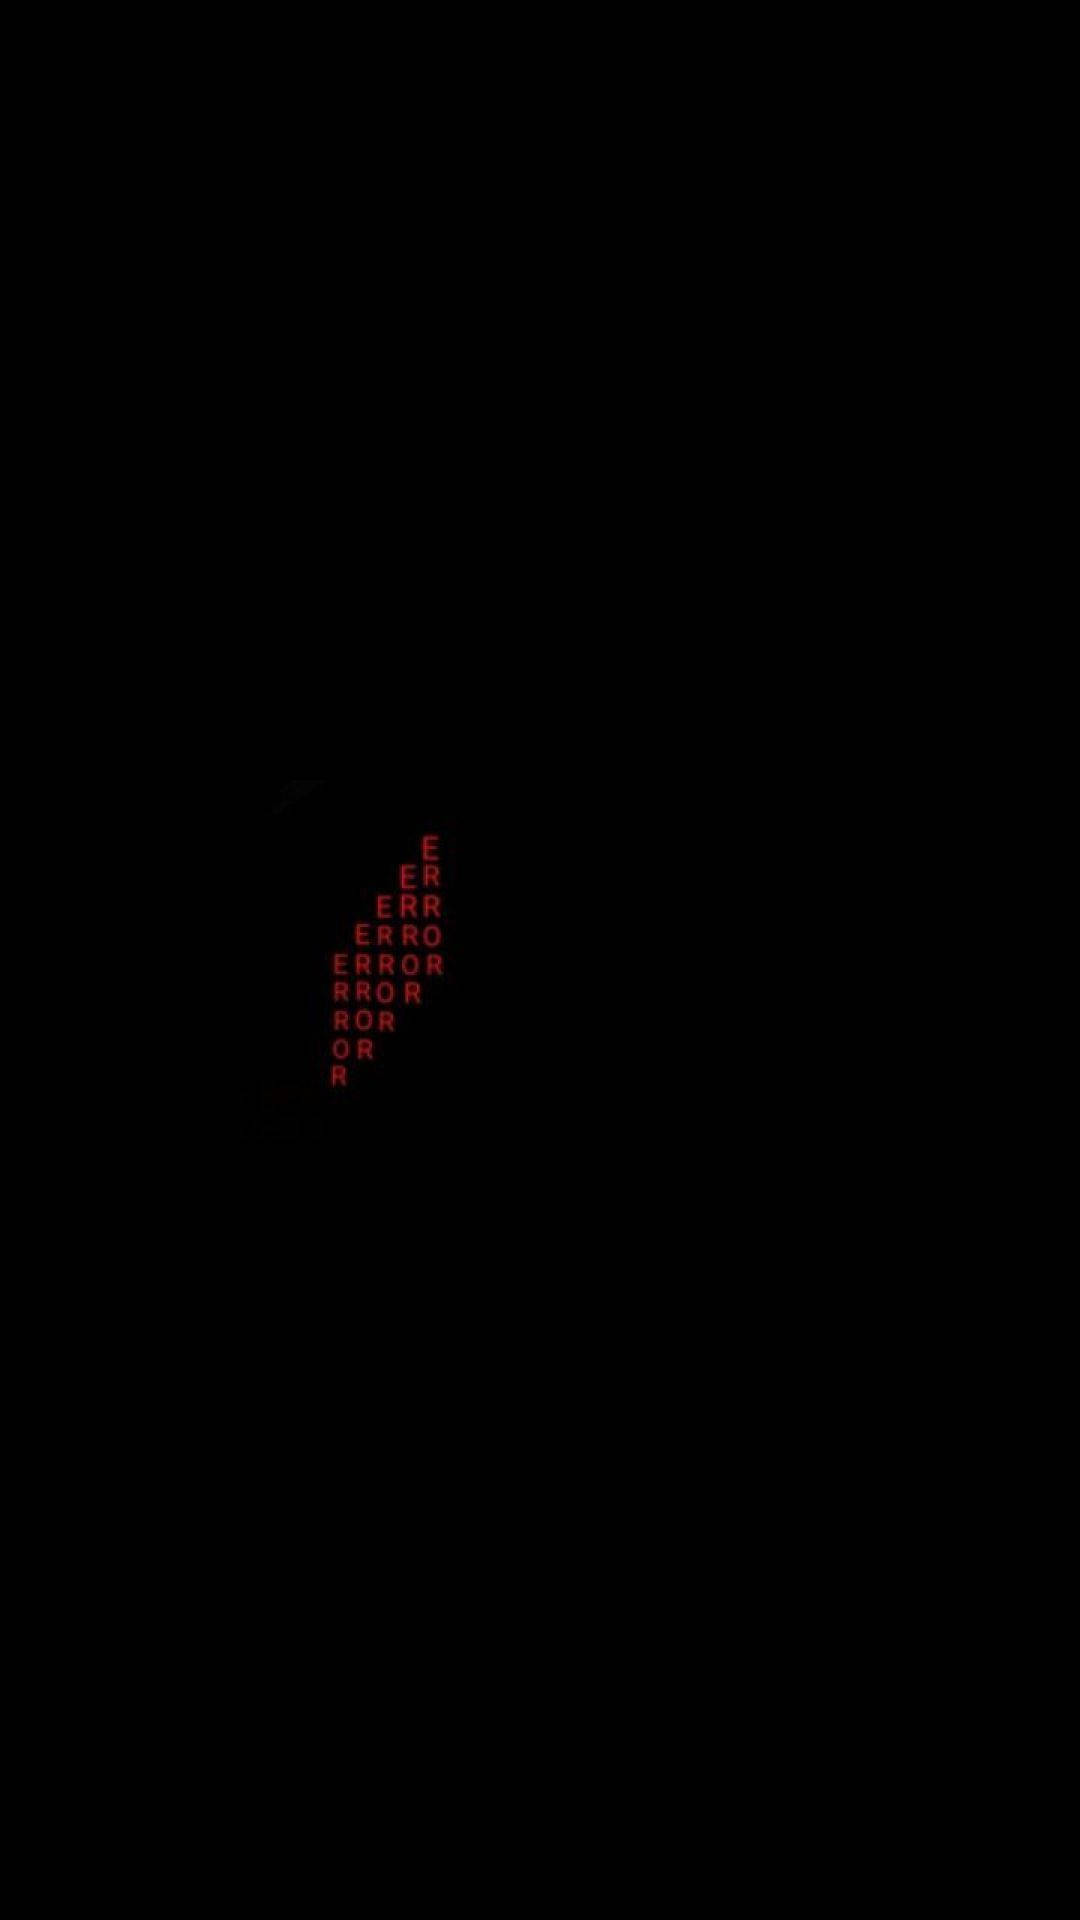 Red And Black Aesthetic Error Background